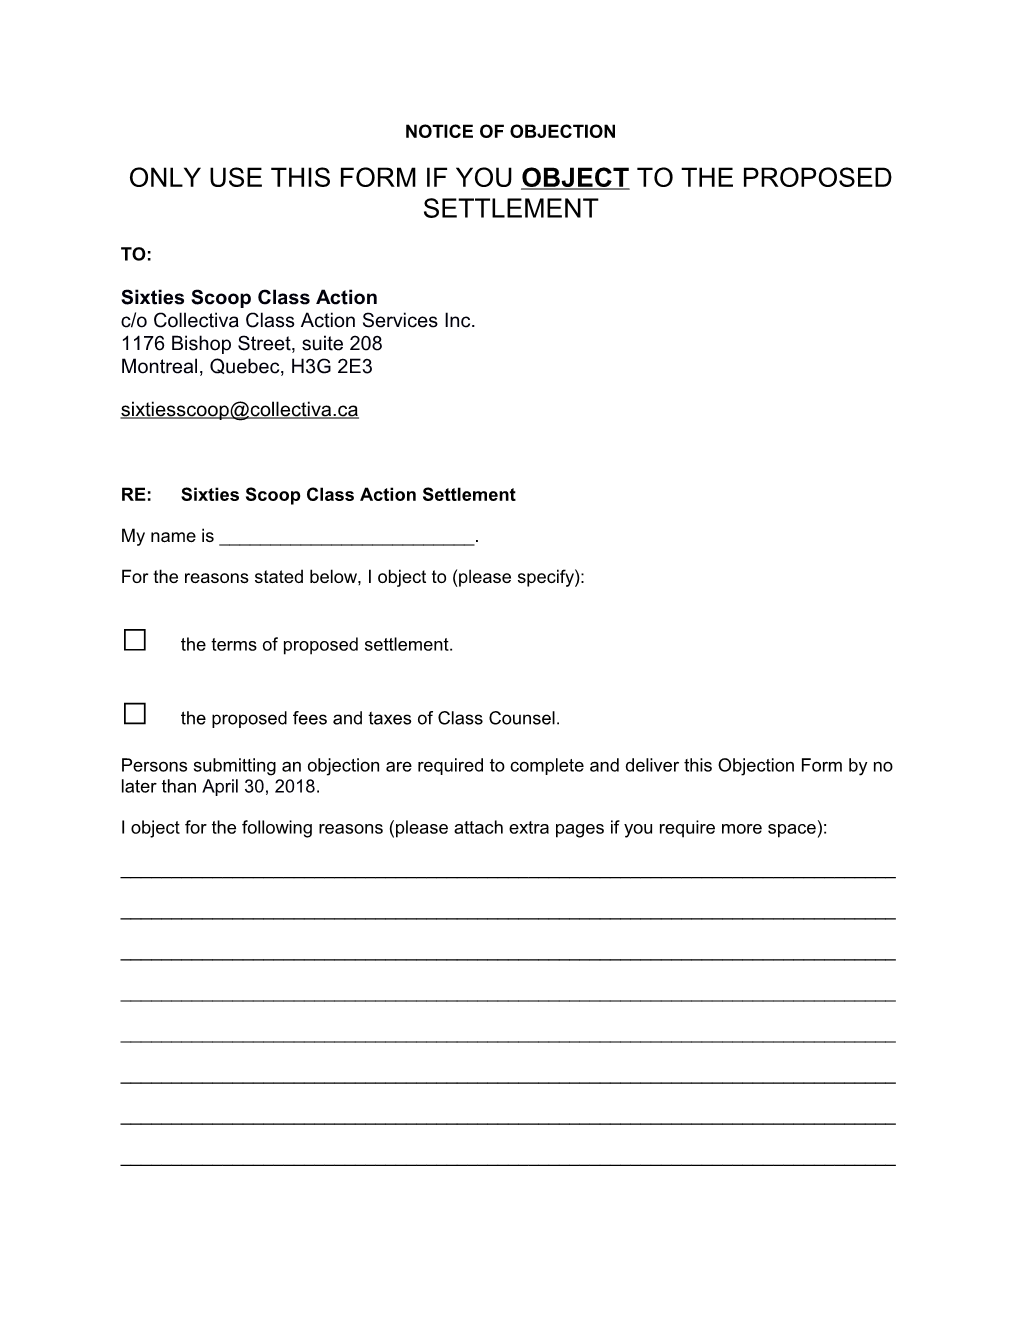 Only Use This Form If You Objectto the Proposed Settlement